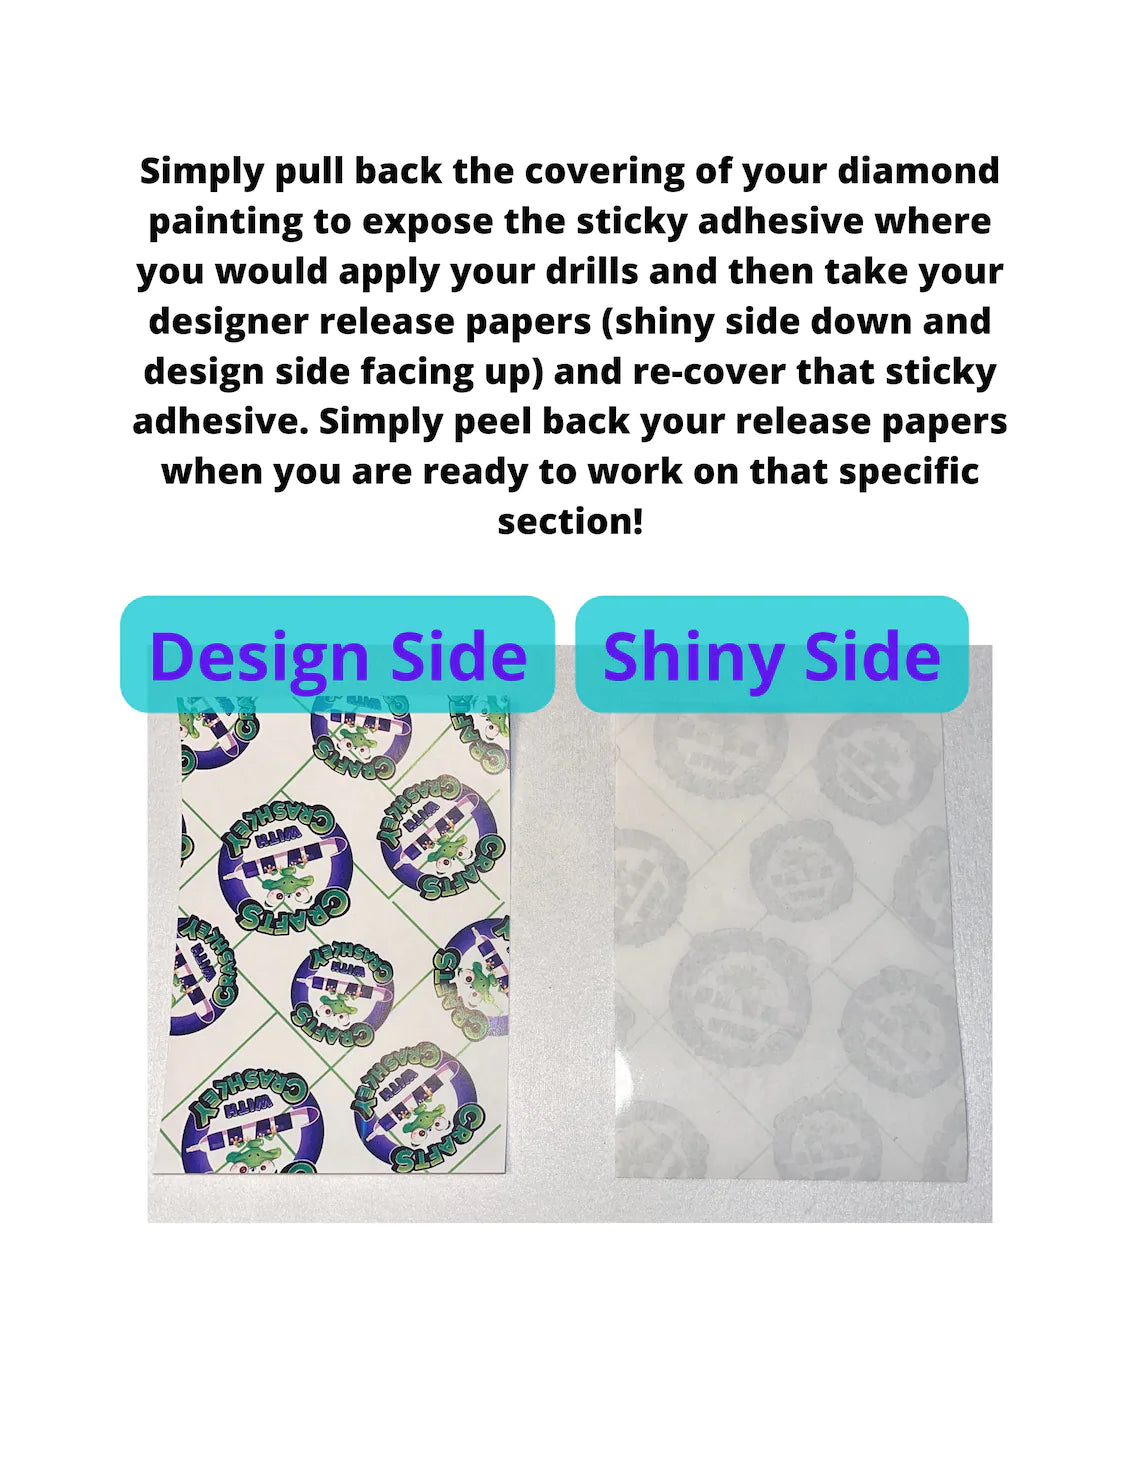 "Libra" Decorative Diamond Painting Release Papers